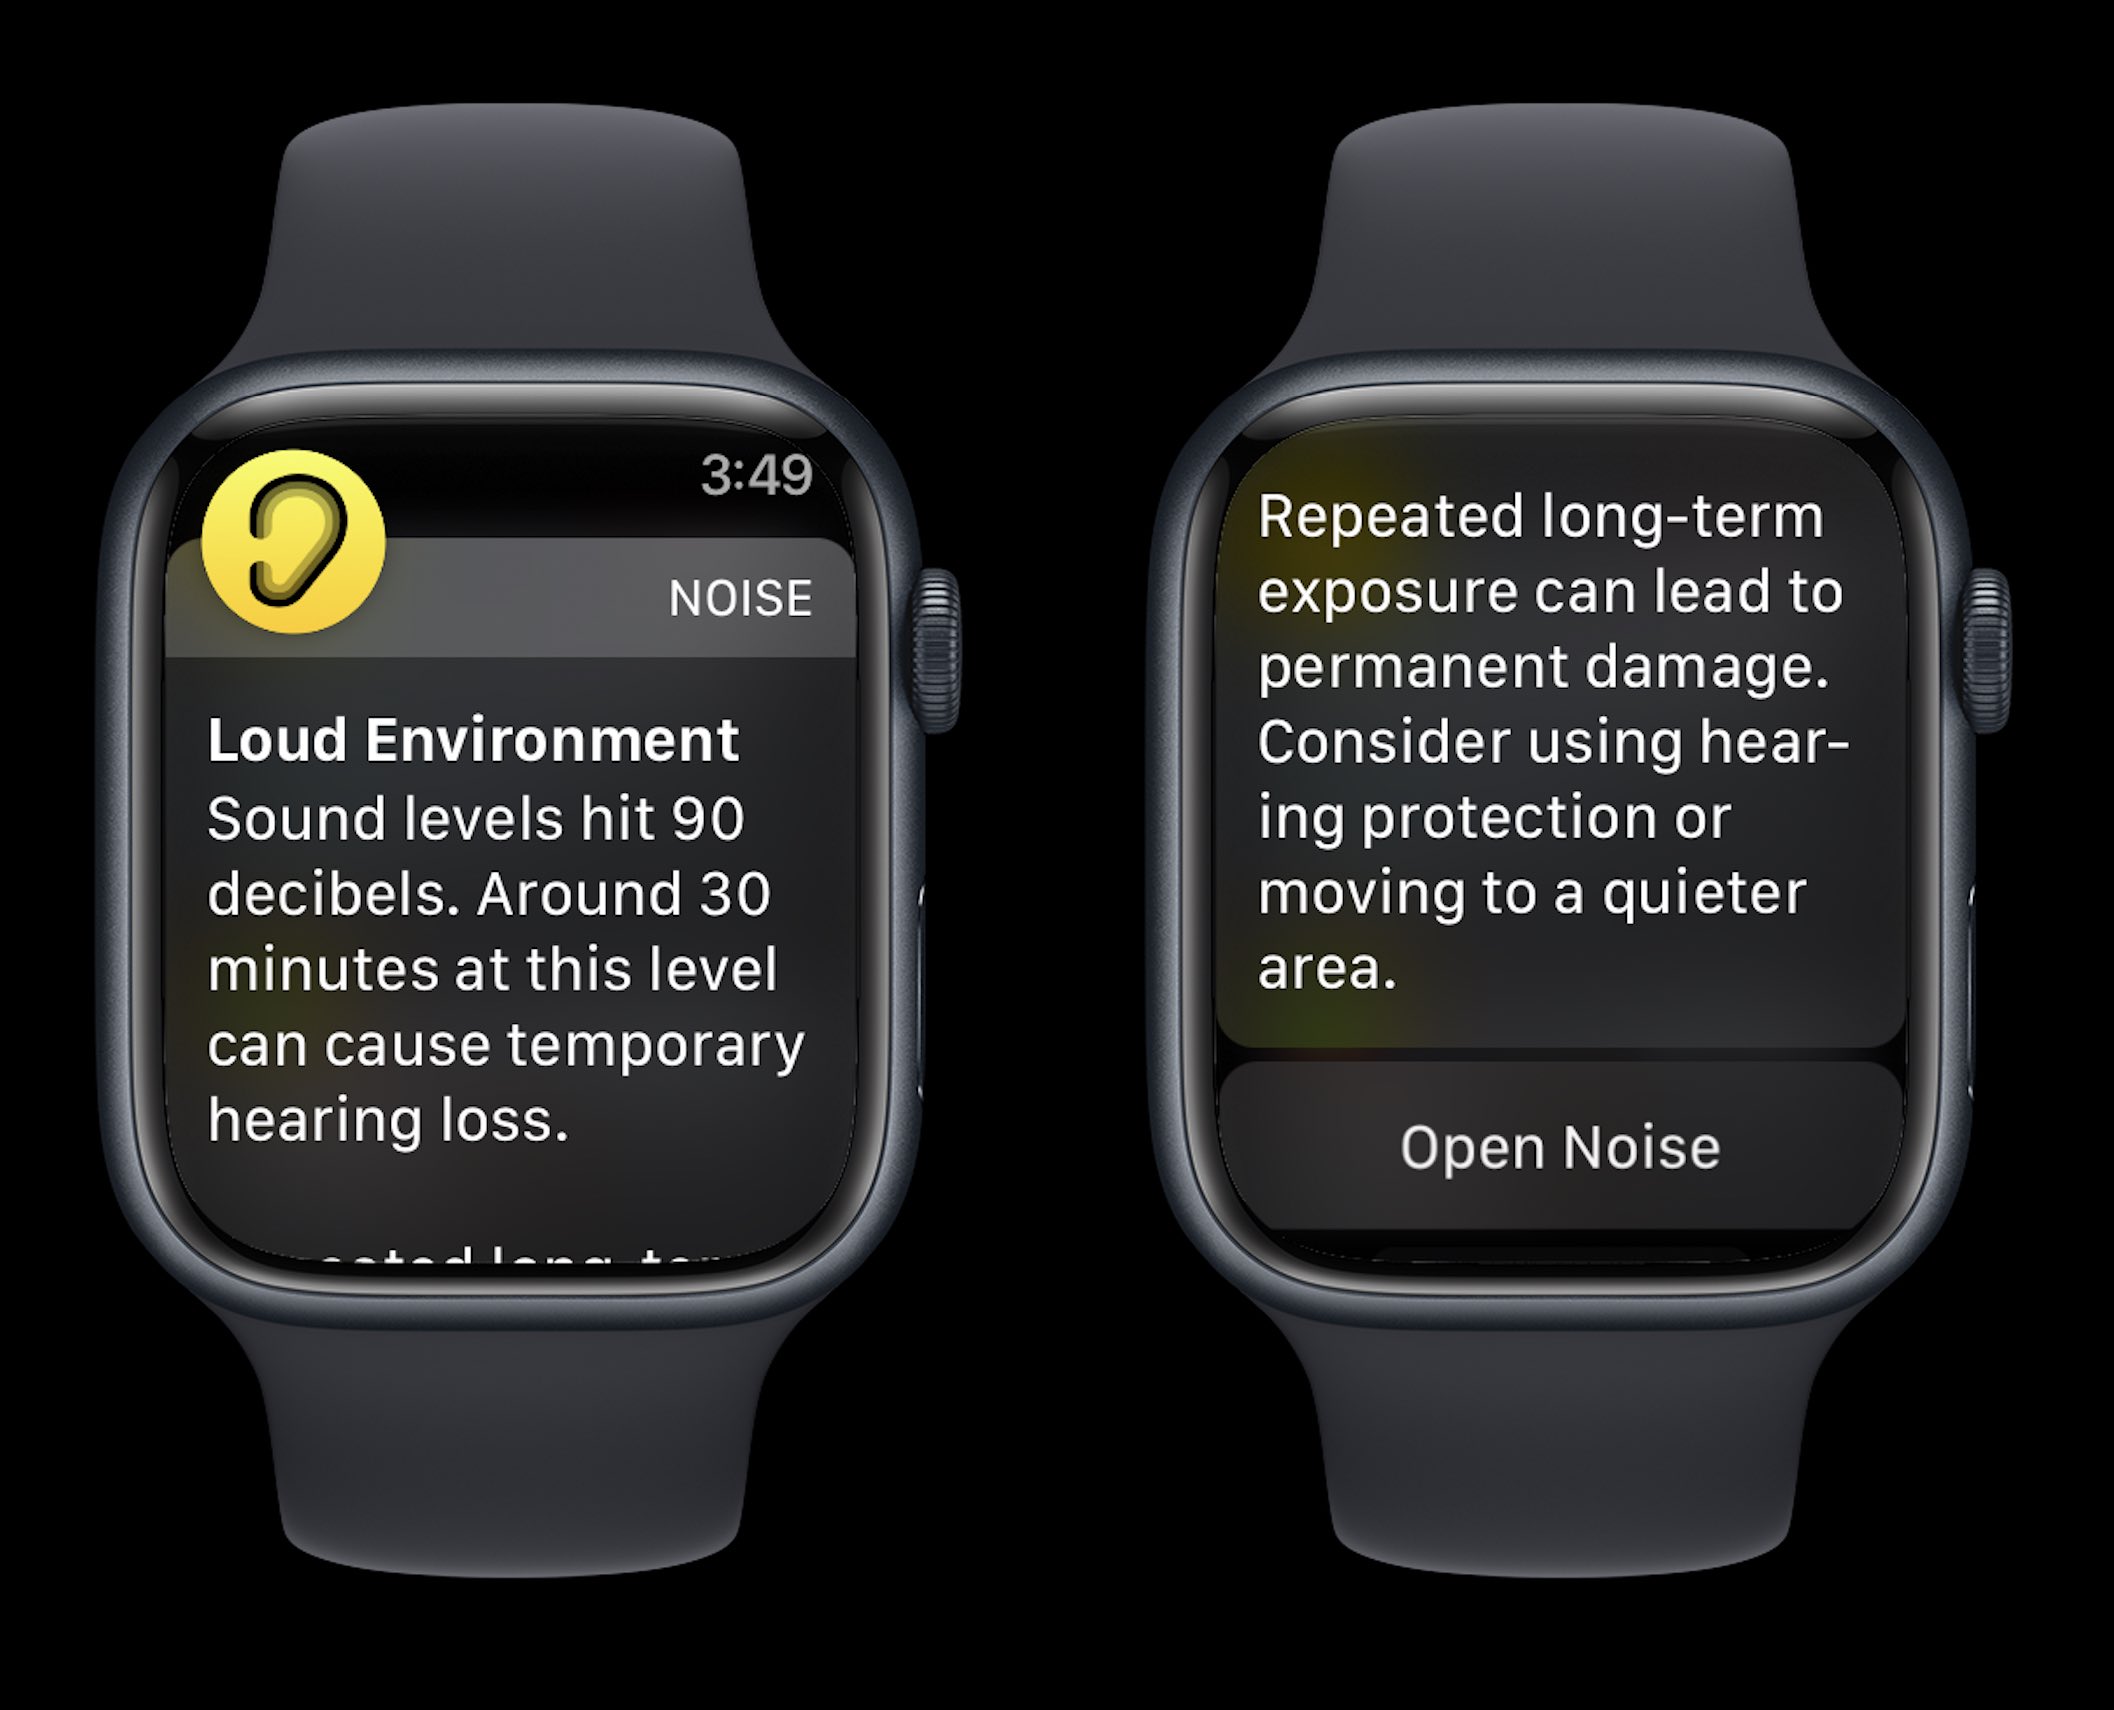 How to check decibel levels on Apple Watch and iPhone - Apple Watch noise warnings